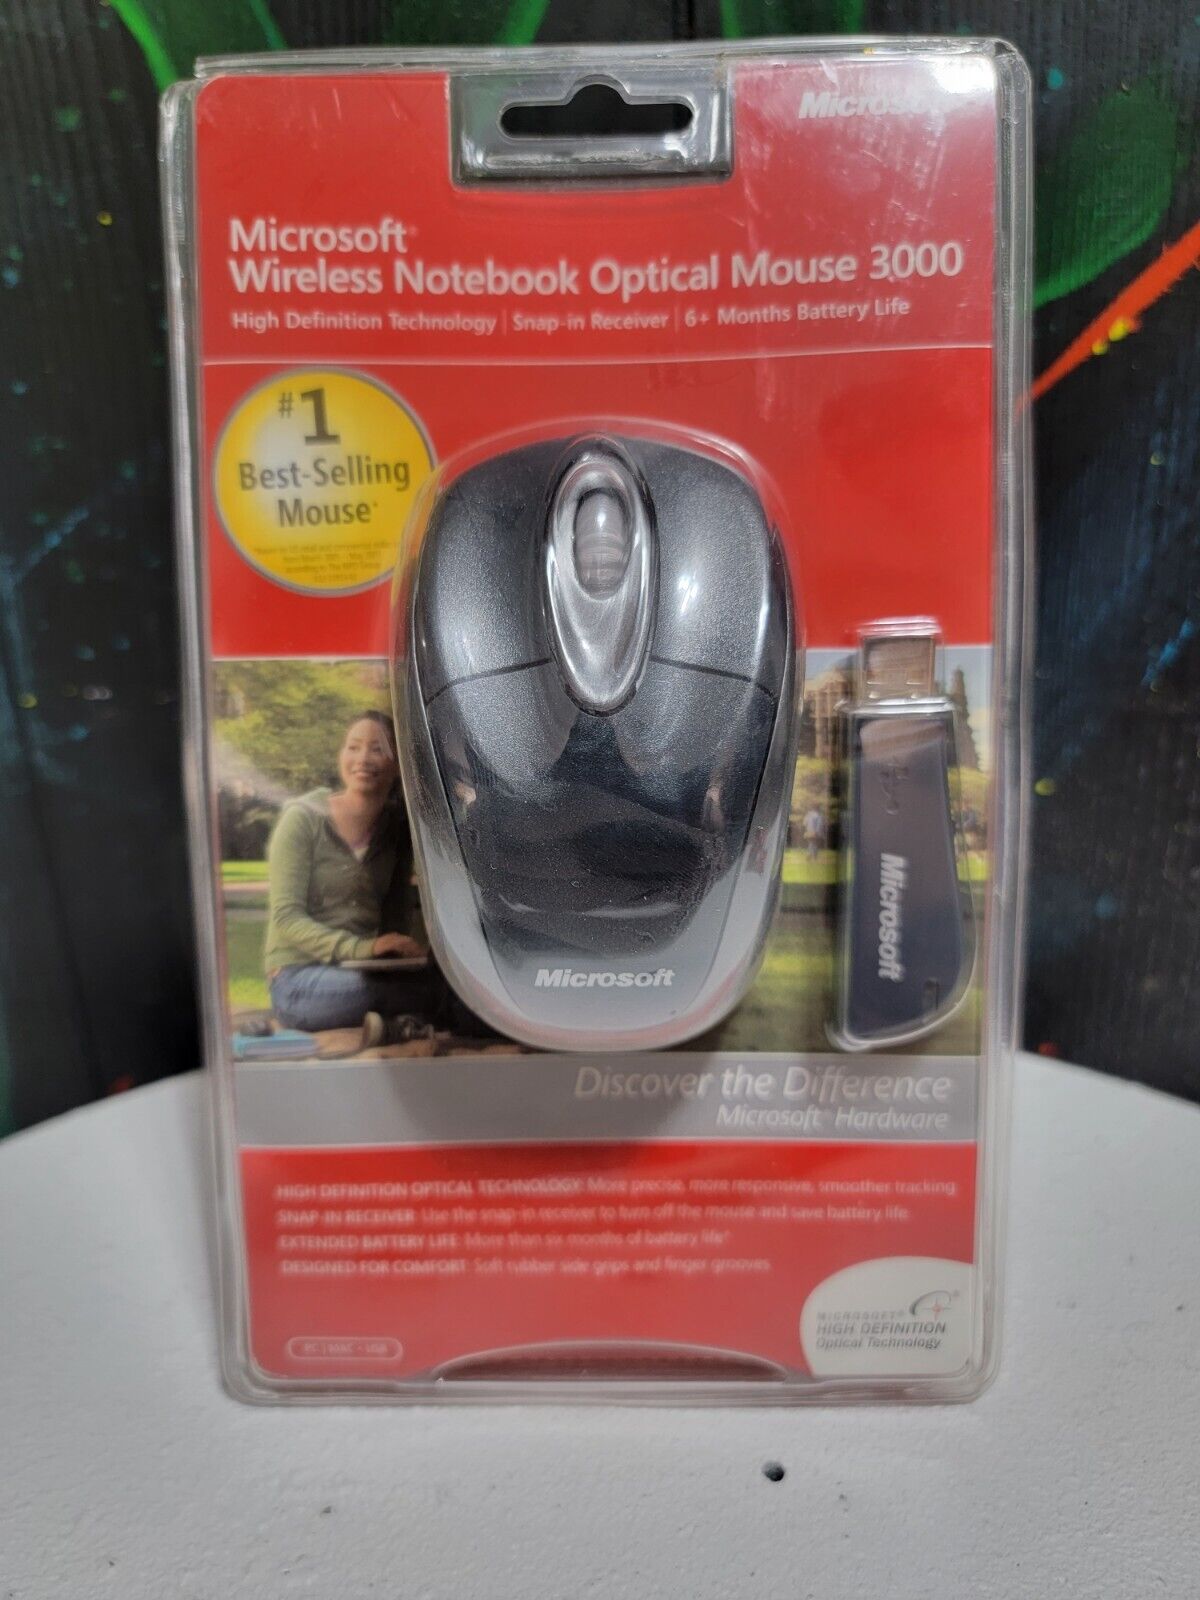 Microsoft Wireless Notebook Optical Mouse 3000 for PC & Mac Model 1056, 1051 New